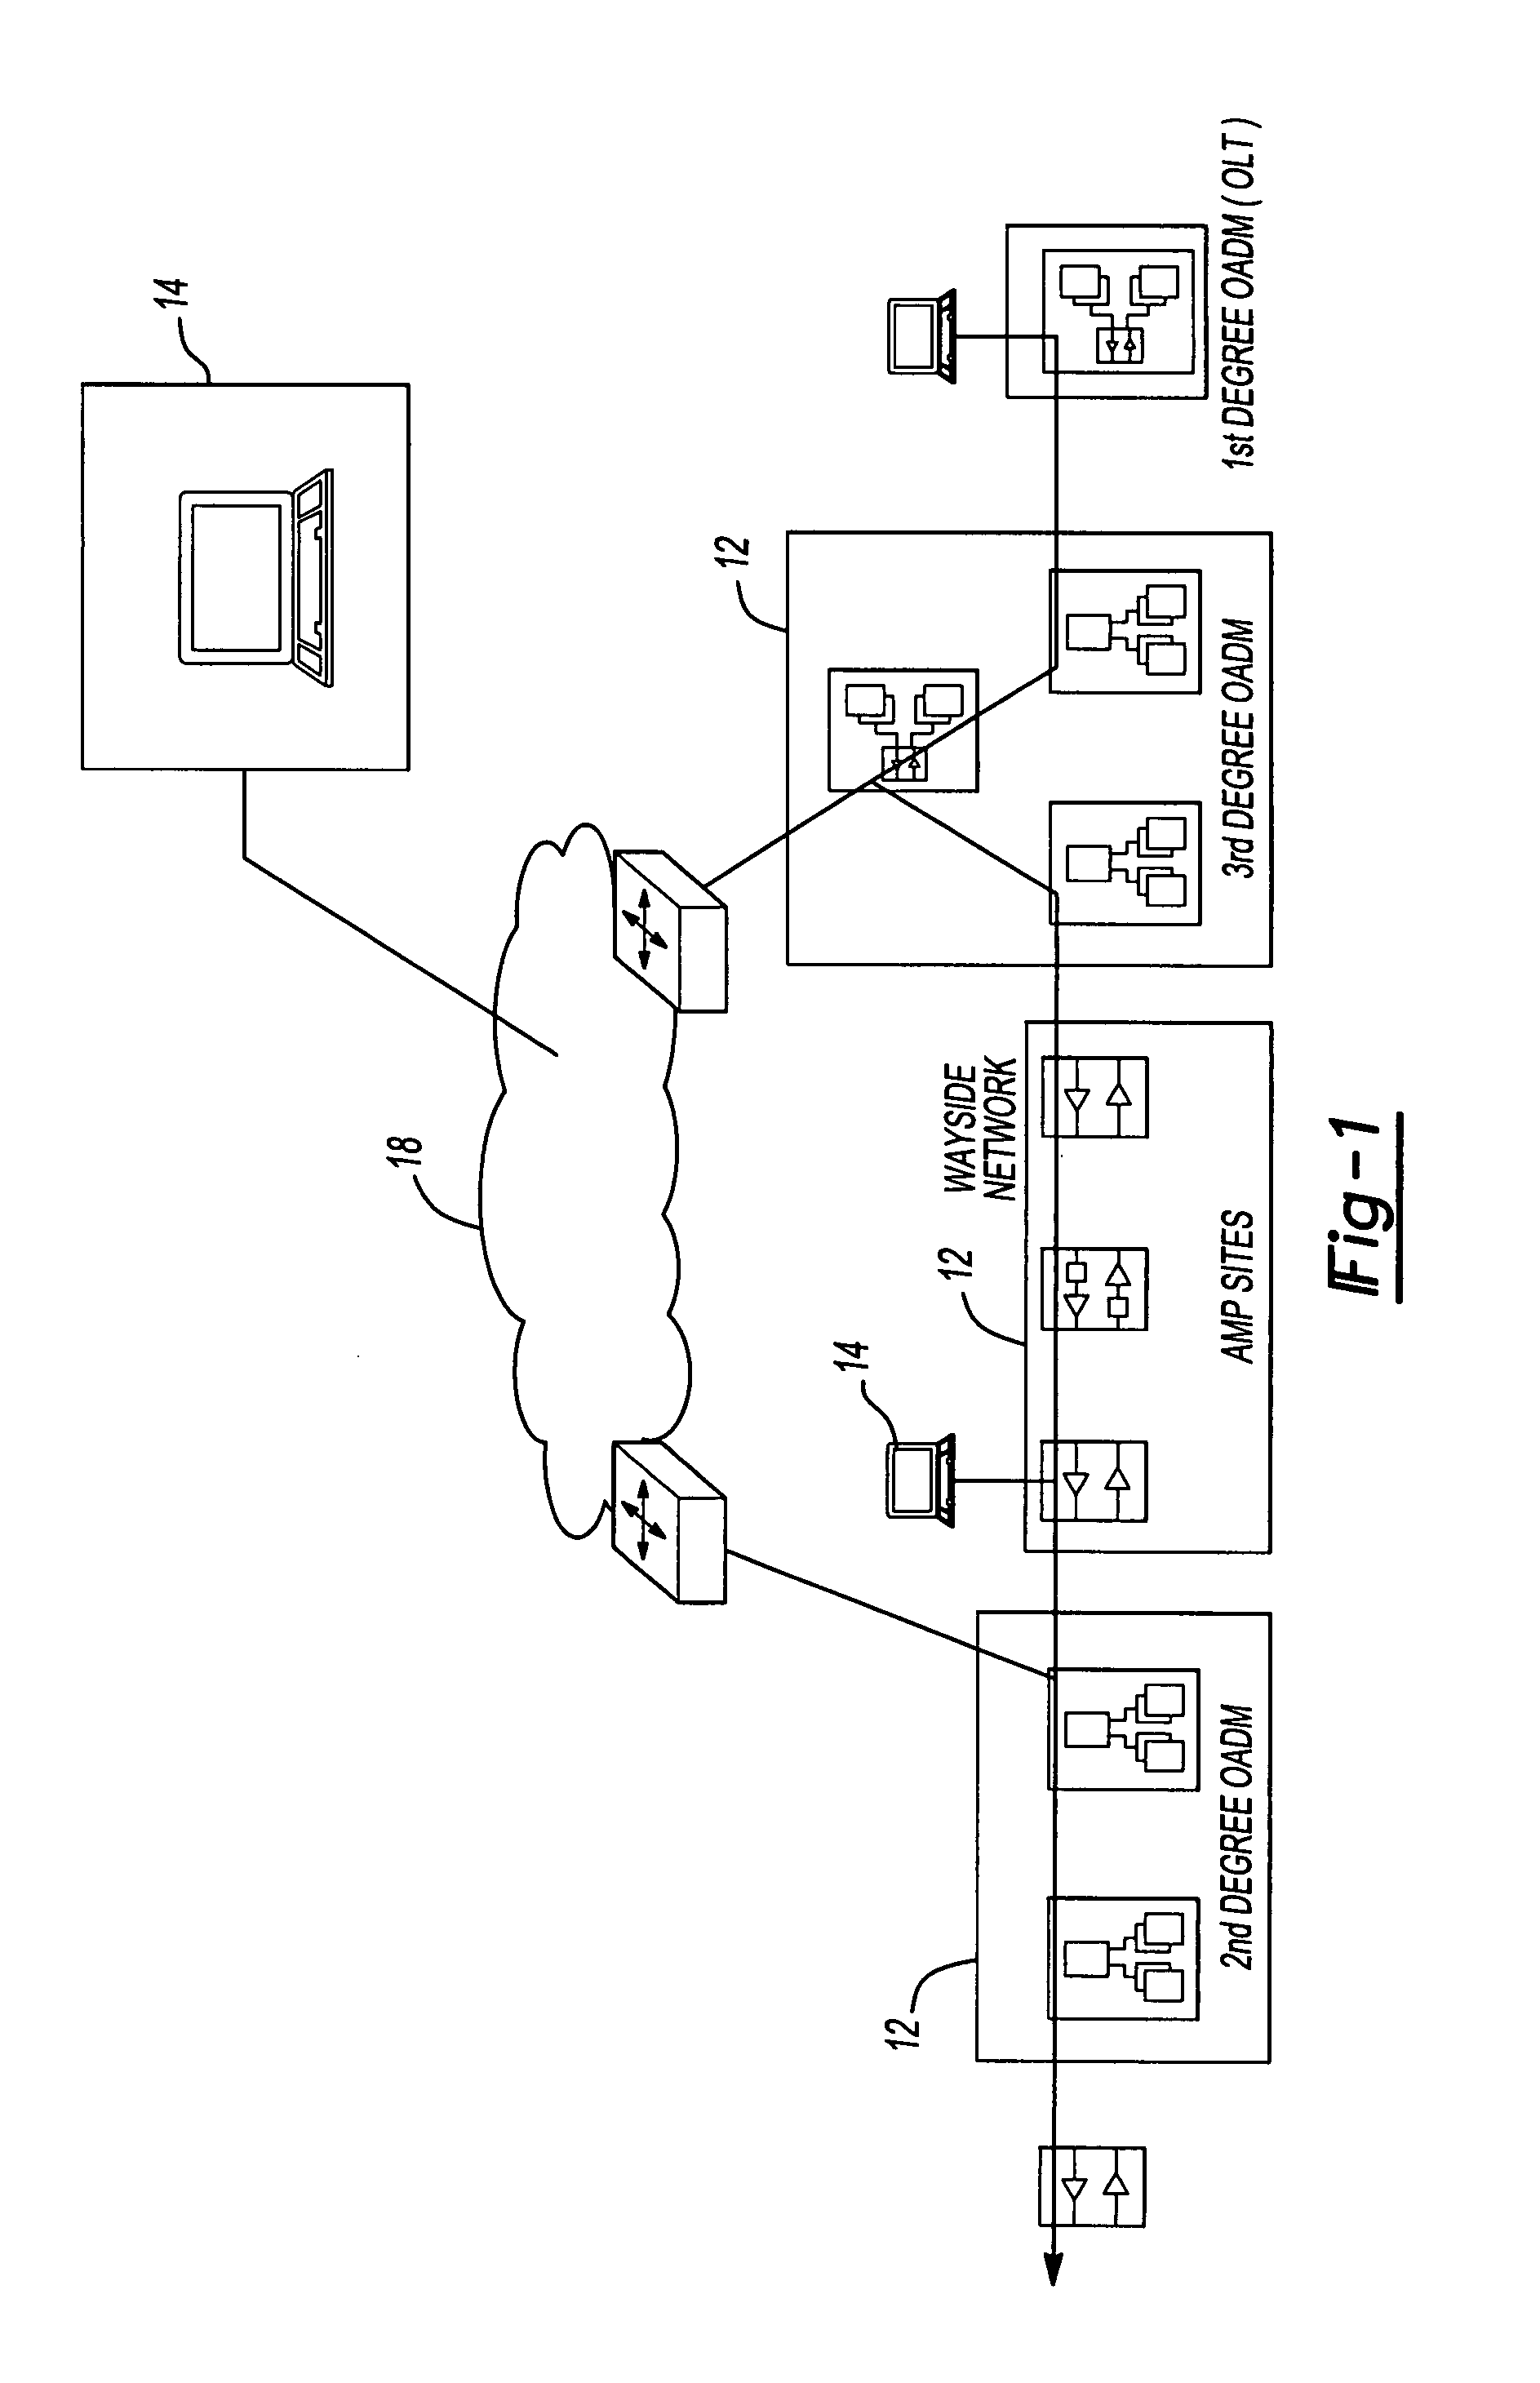 Network diagnostic tool for an optical transport network